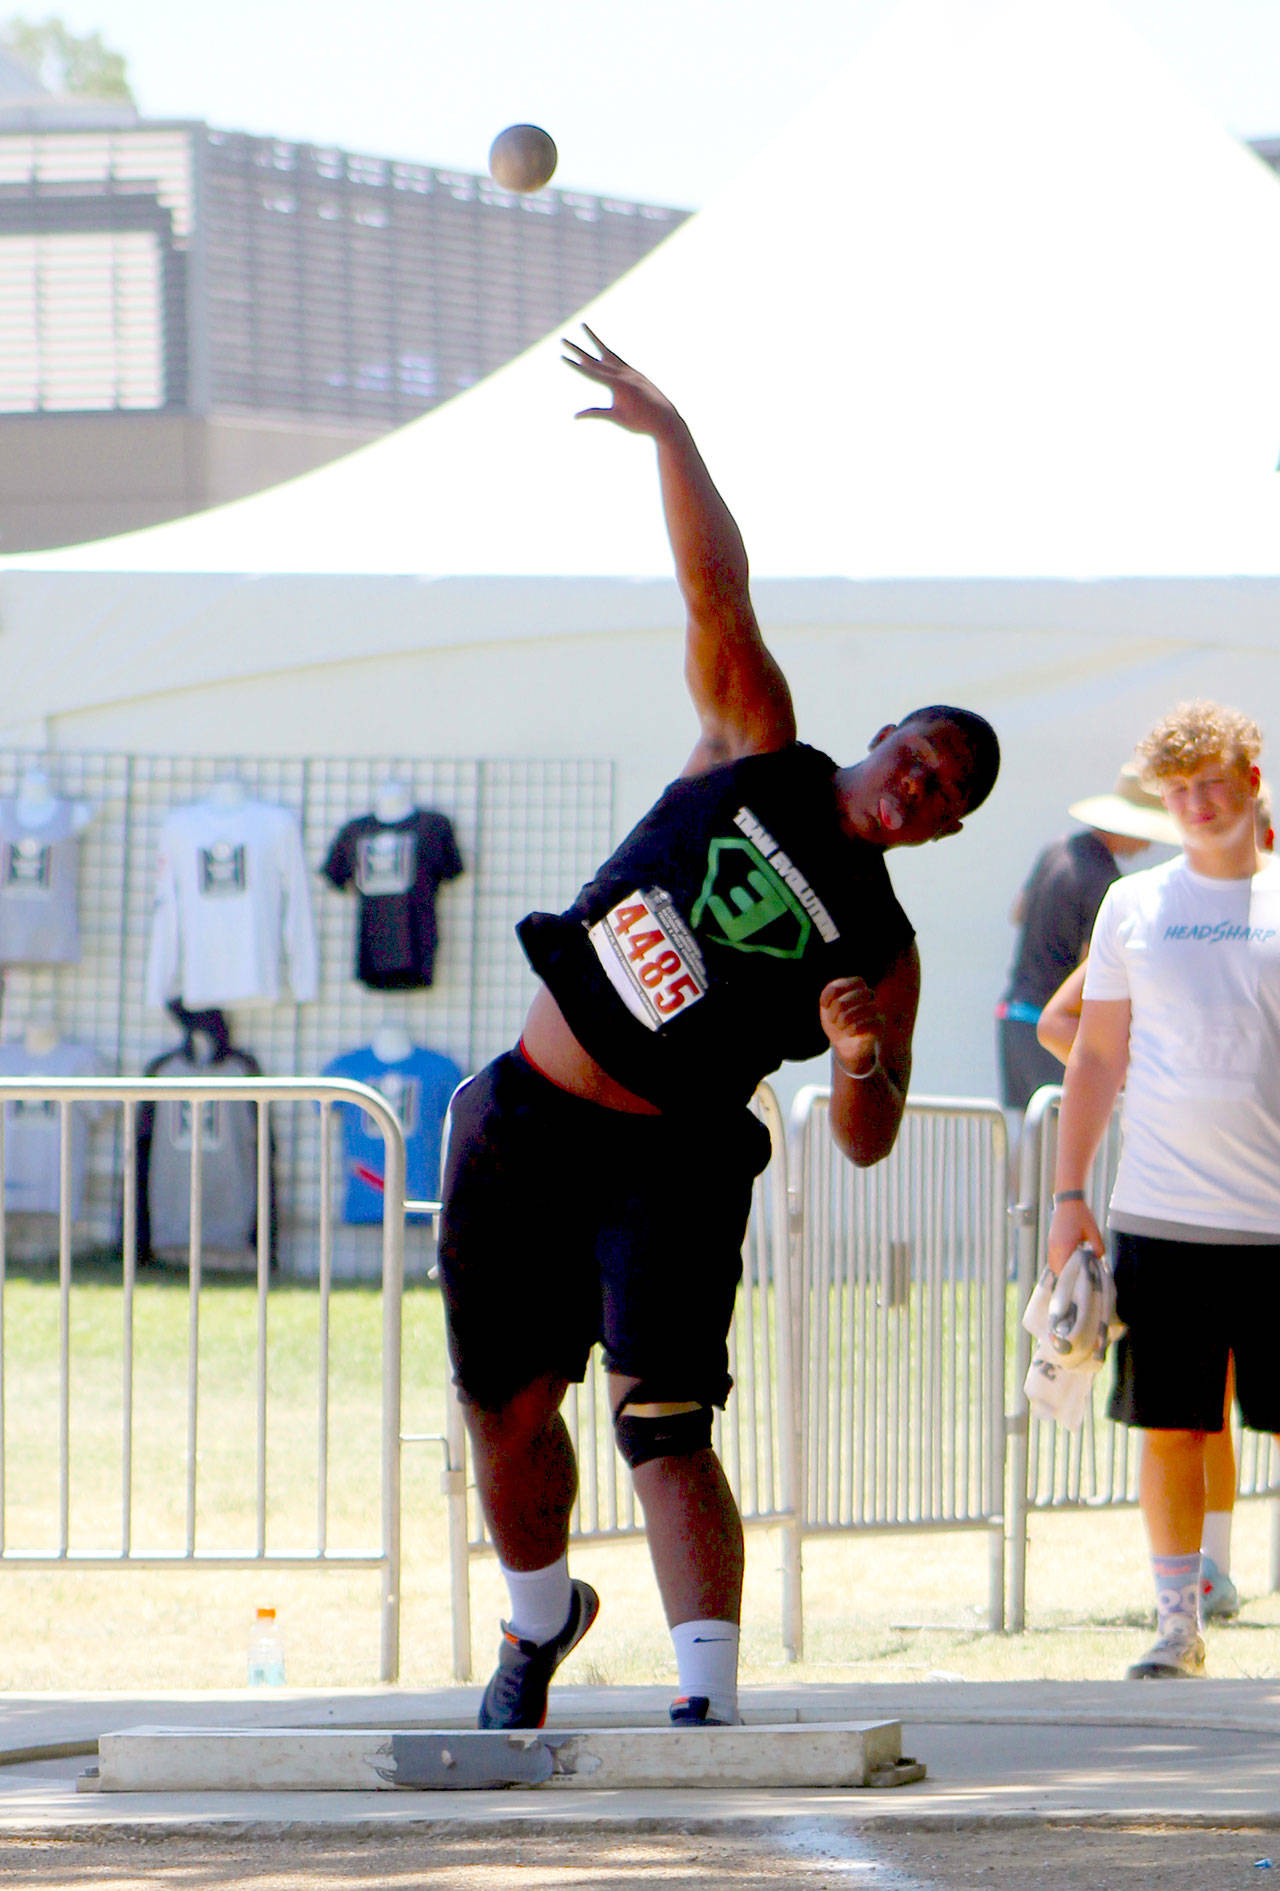 Team Evolution’s JaBron Brooks hurls a shot put during the 13-14 year-old boys competition at the USATF Junior Olympic National Championships in Sacramento, Calif. (Submitted Photo)